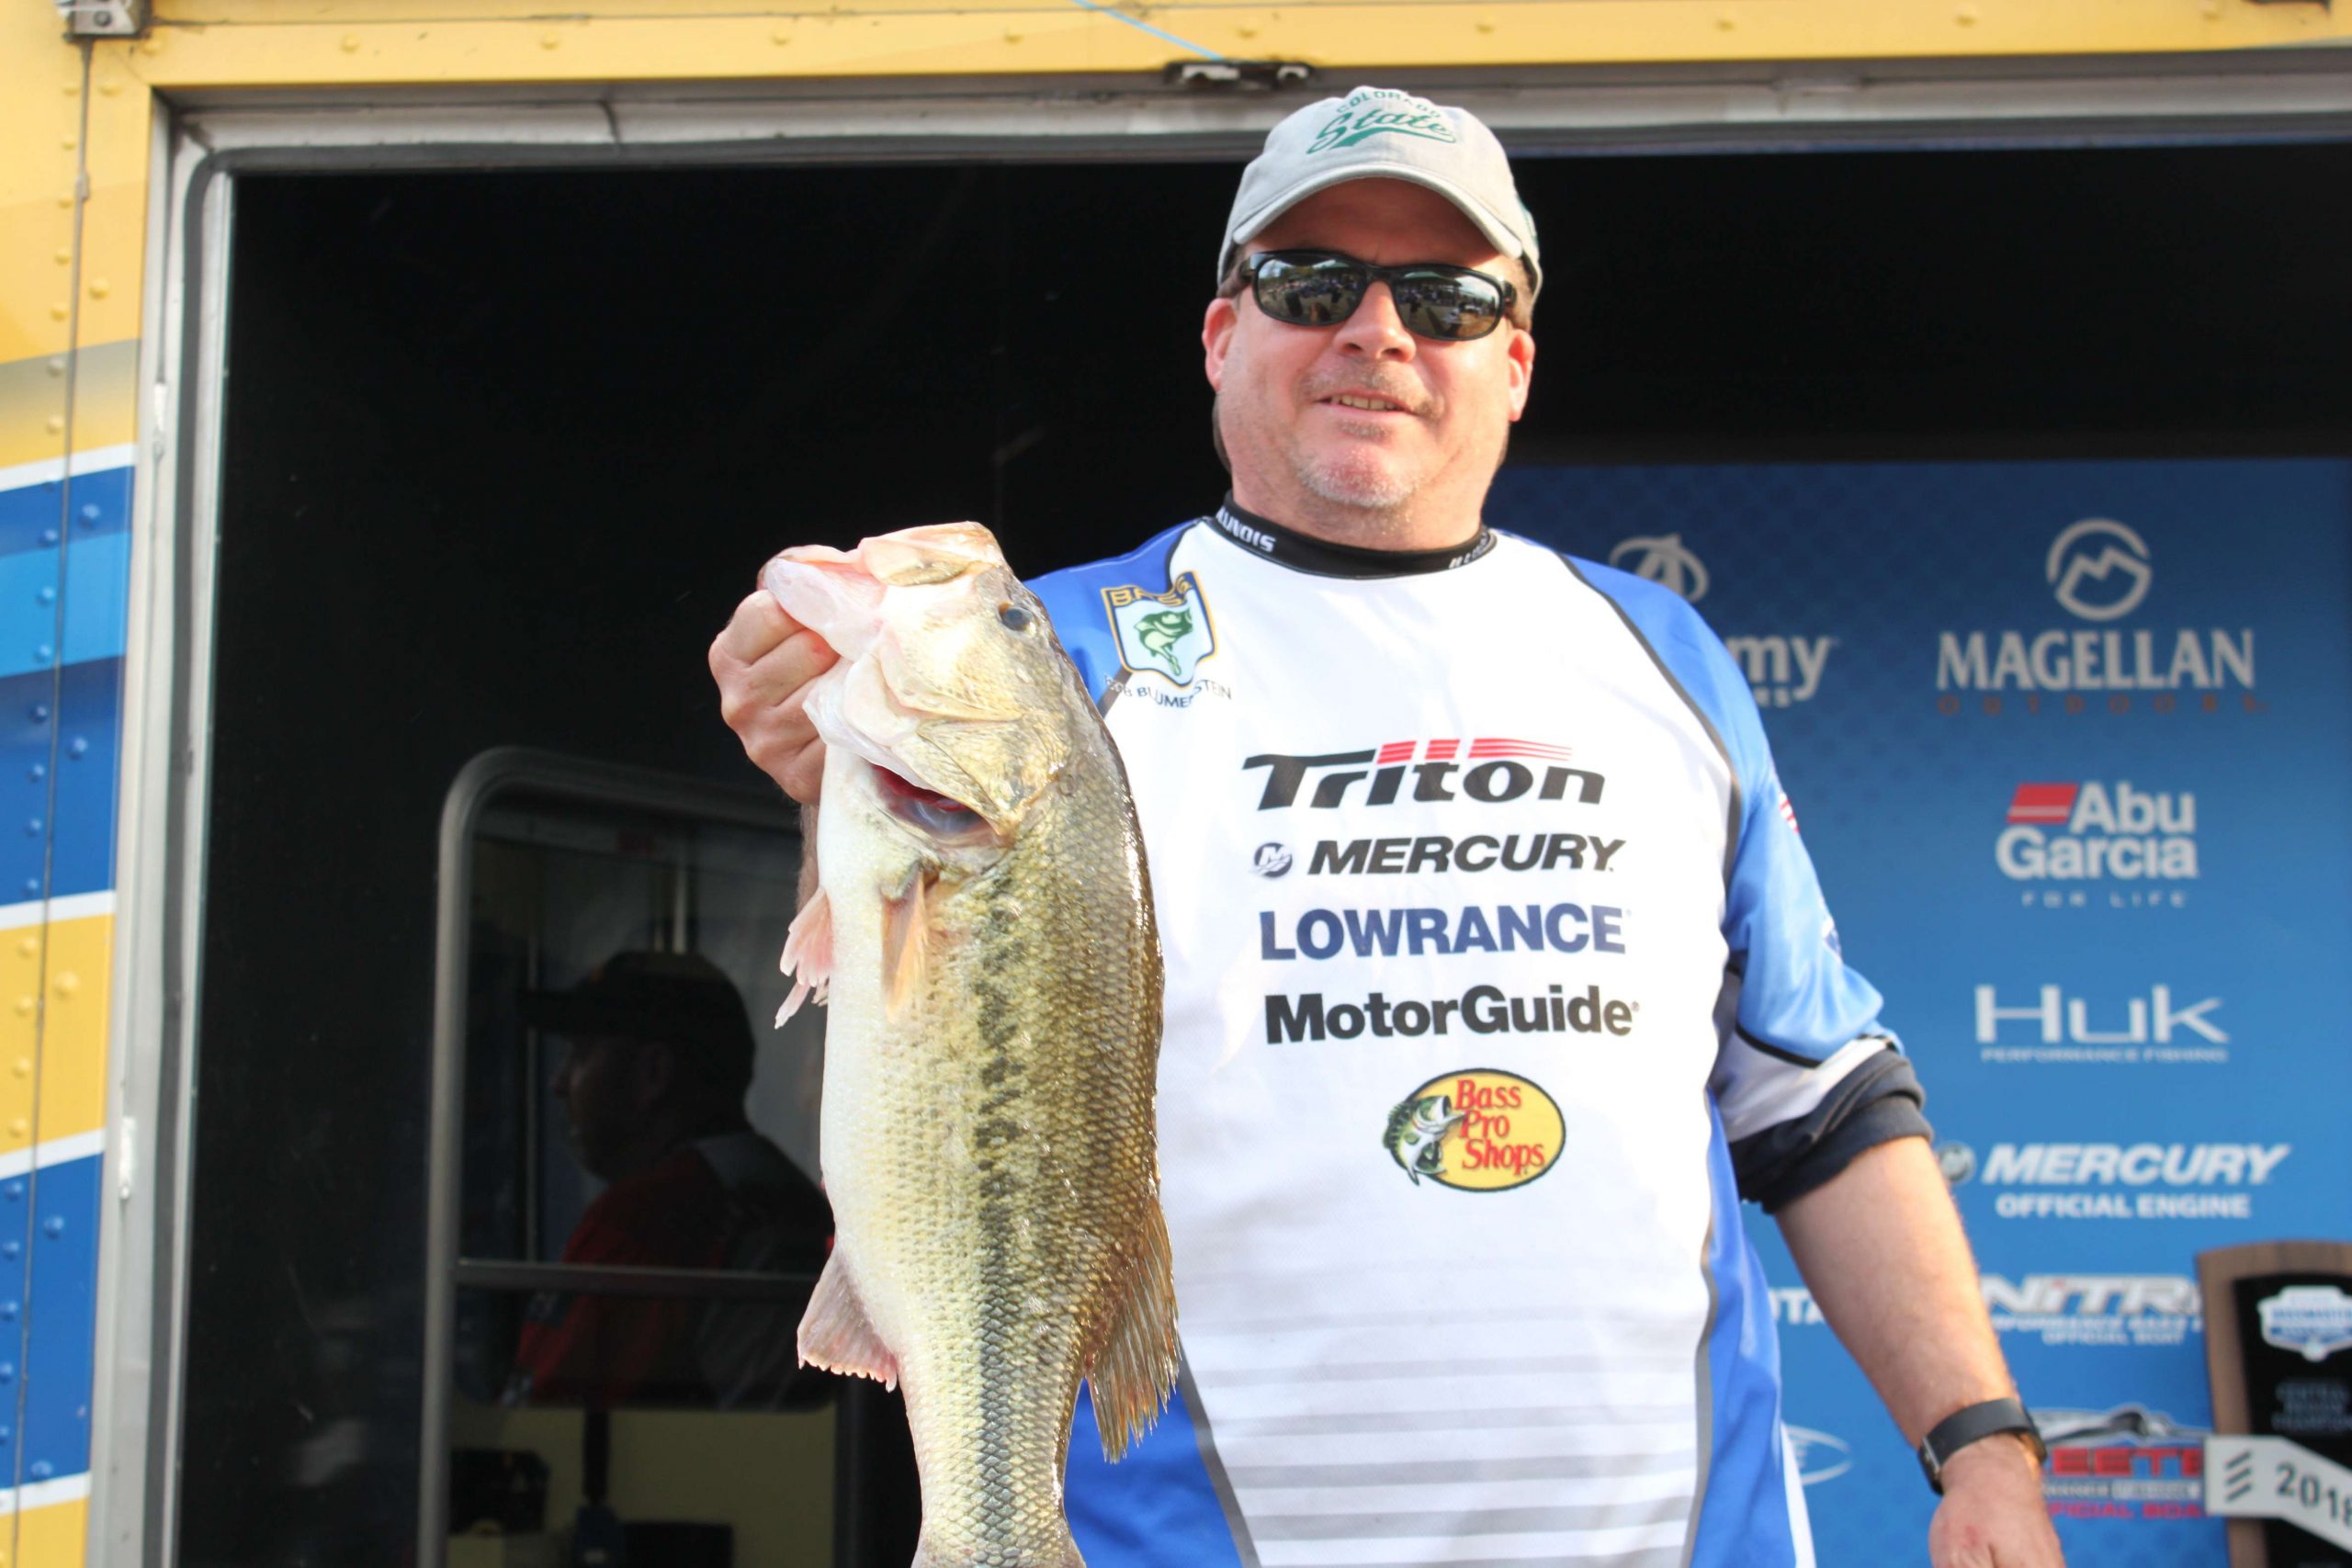 And thereâs the biggunâ of the bunch. This bass was a 7-pounder and it anchored Blumensteinâs Friday bag, which weighed 16-7. It was his lightest limit of the week, but it was enough to given him the win and the $6,500 check that goes with it.